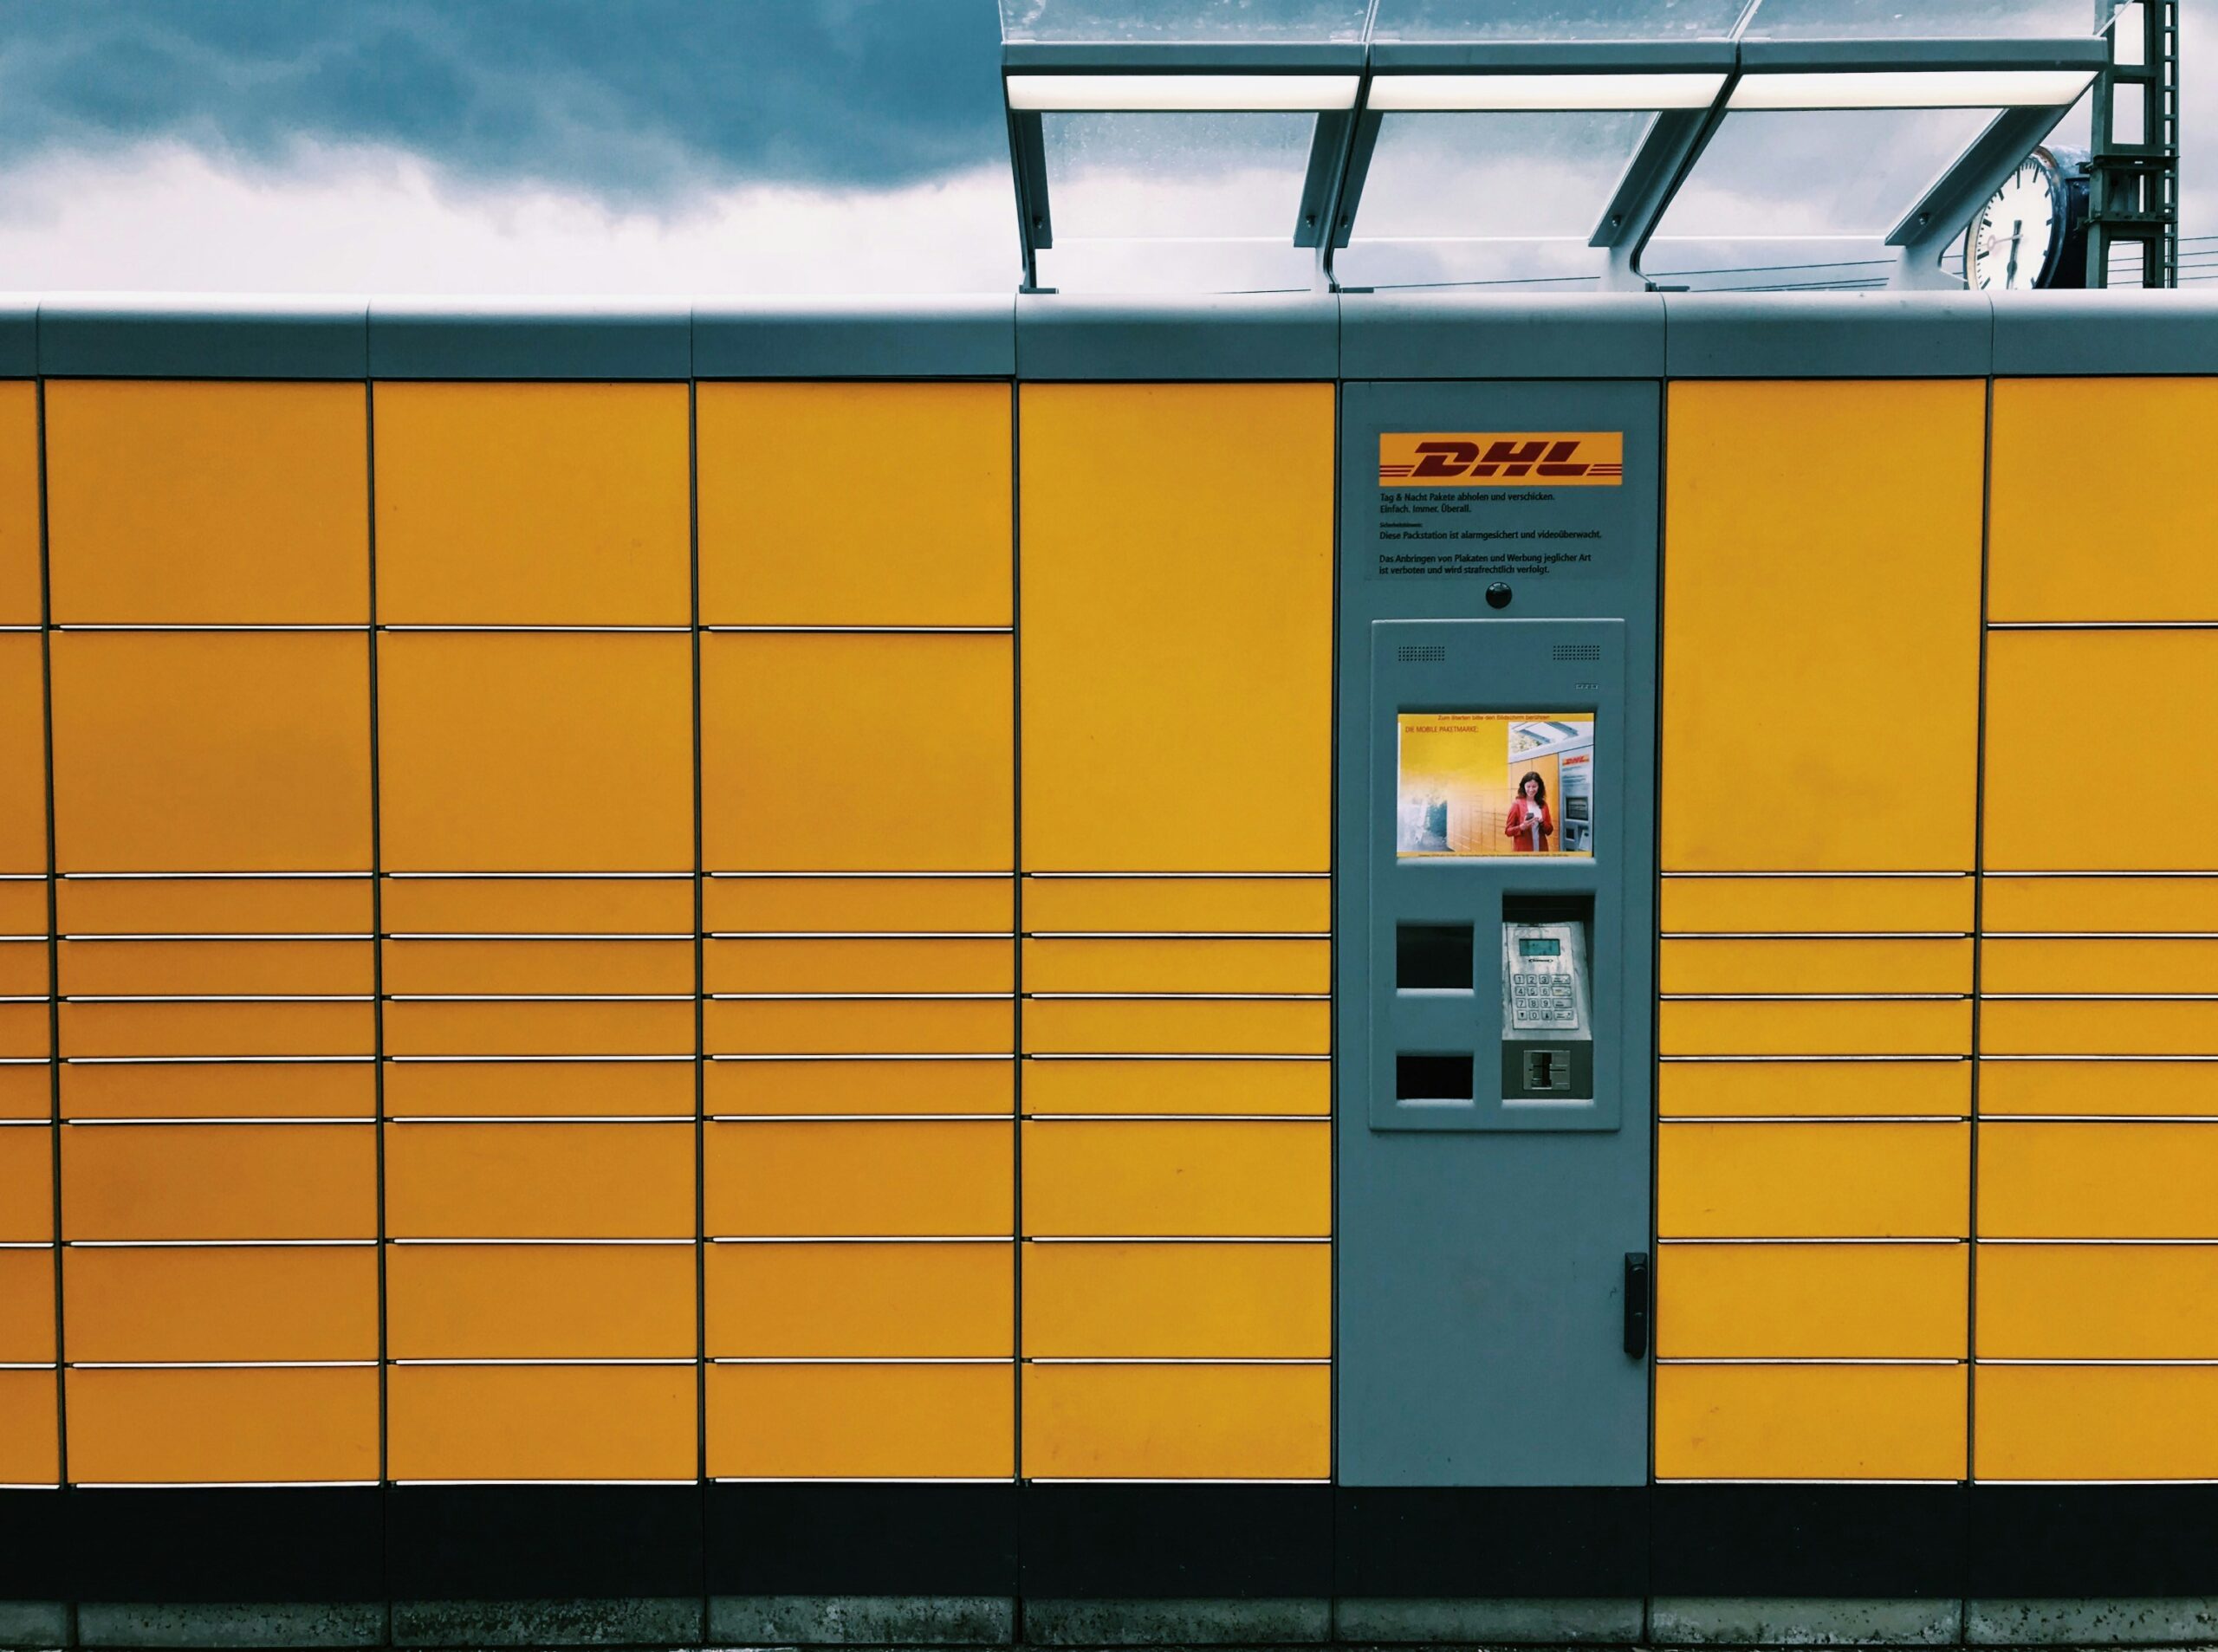 A DHL package locker system with yellow and gray compartments and a self-service kiosk, an example of process automation in logistics.